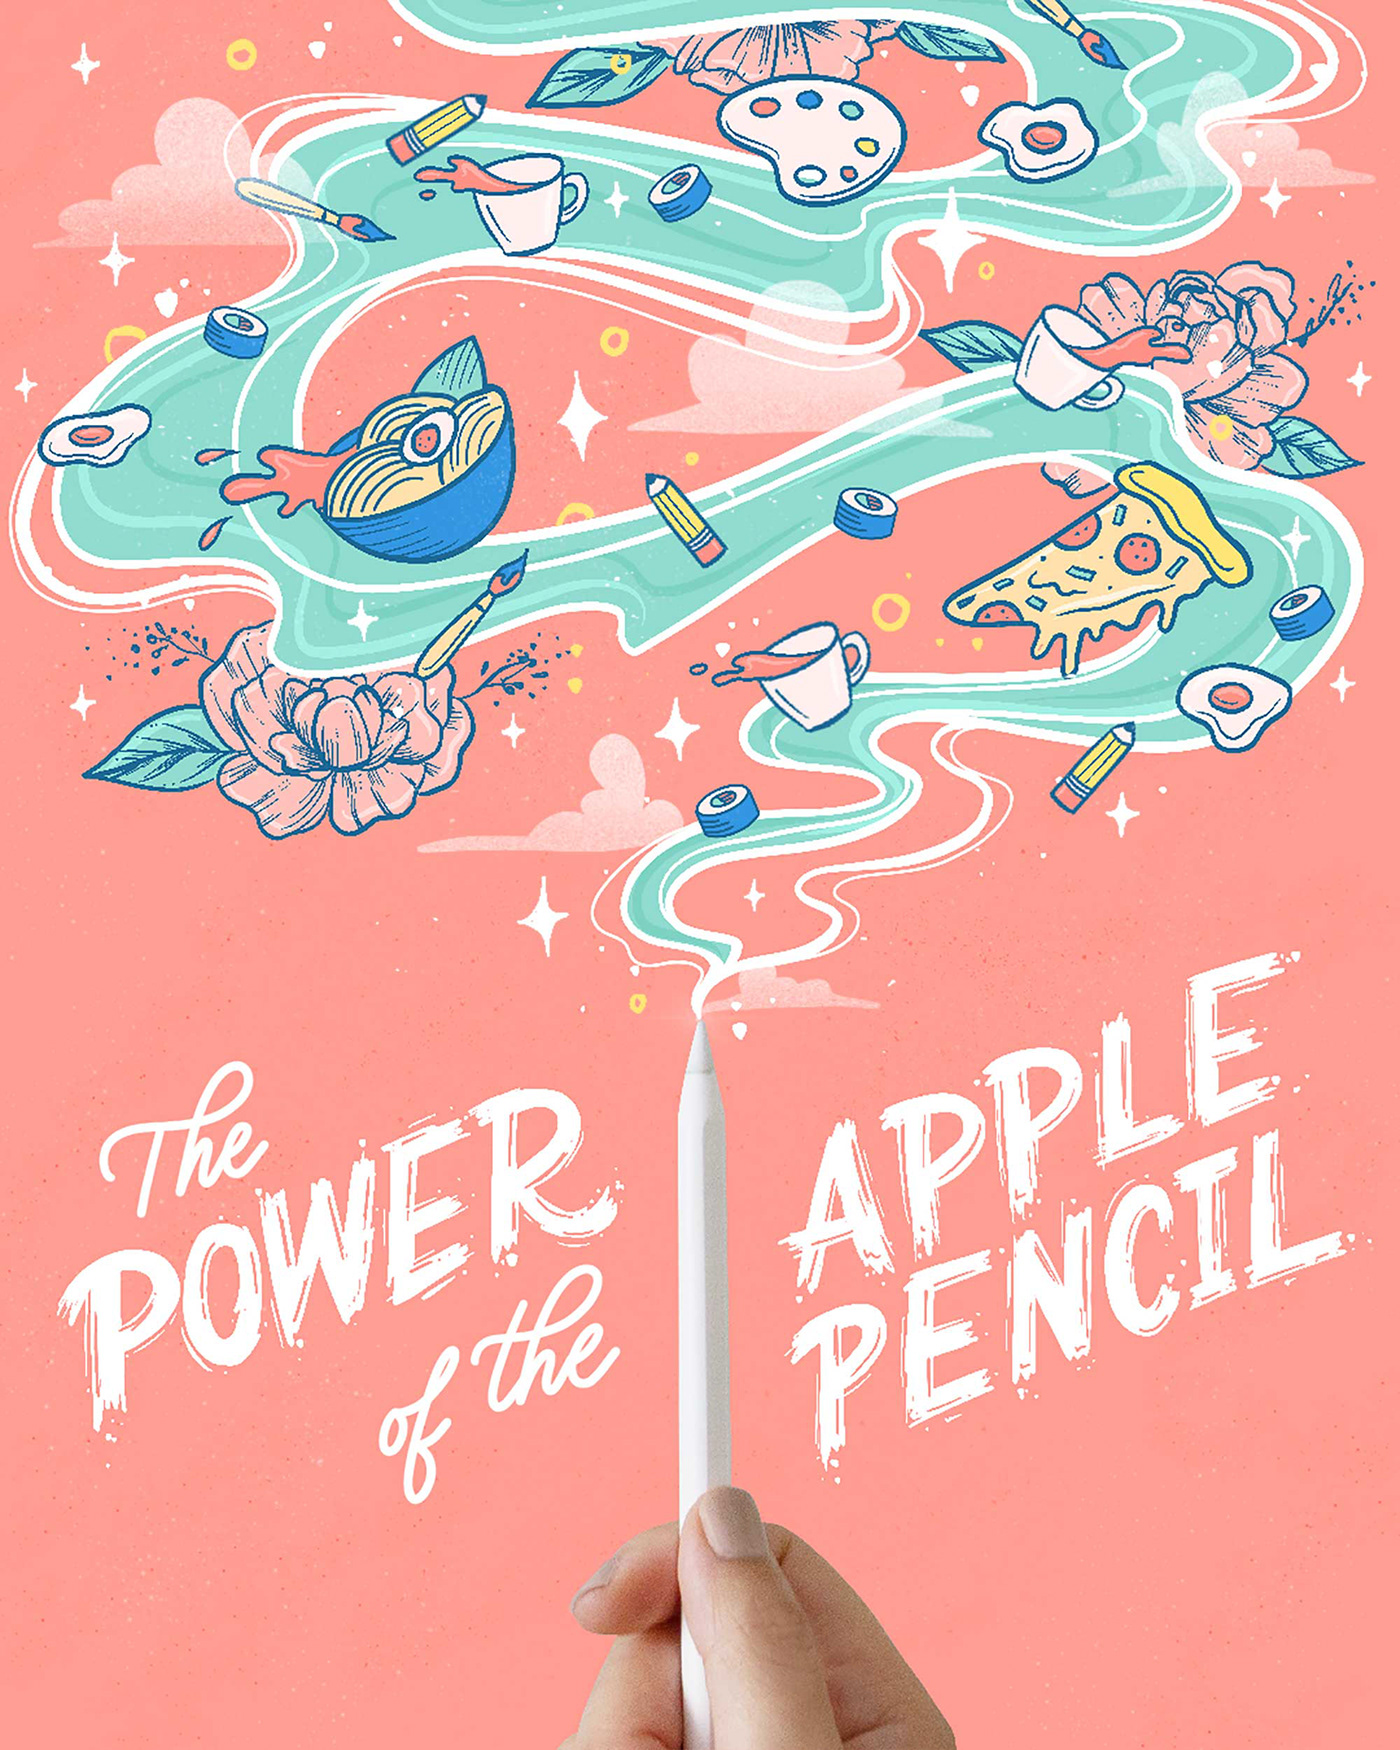 Apple pencil with illustration bursting out with the phrase, "the power of the apple pencil"